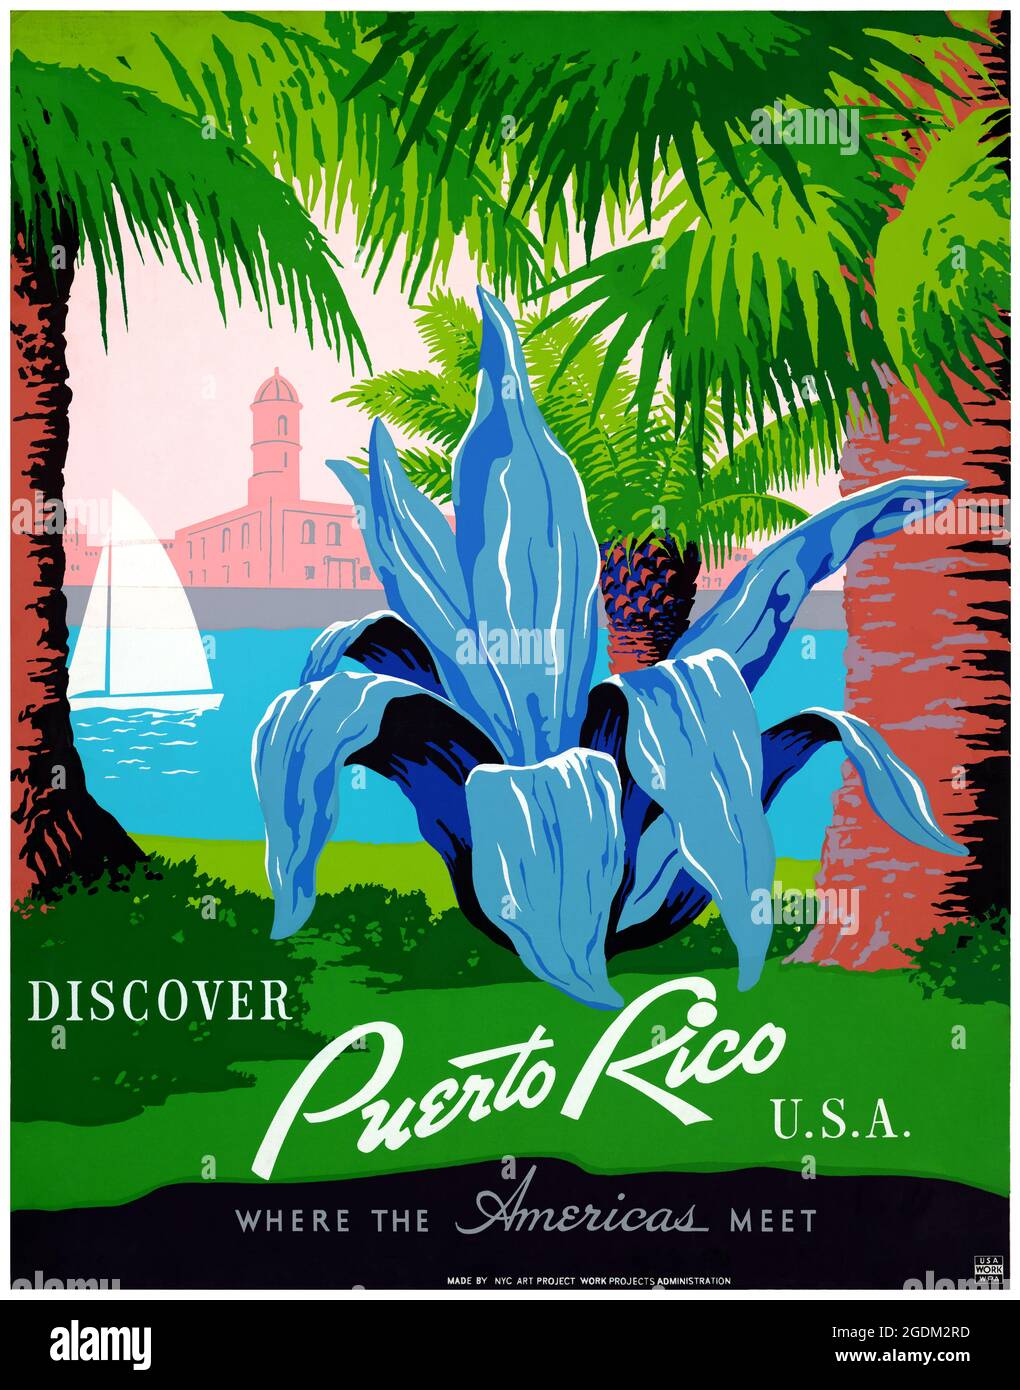 Discover Puerto Rico U.S.A. Where the Americas meet by Frank S. Nicholson (dates unknown). Restored vintage WPA poster published in the 1940s in the USA. Stock Photo